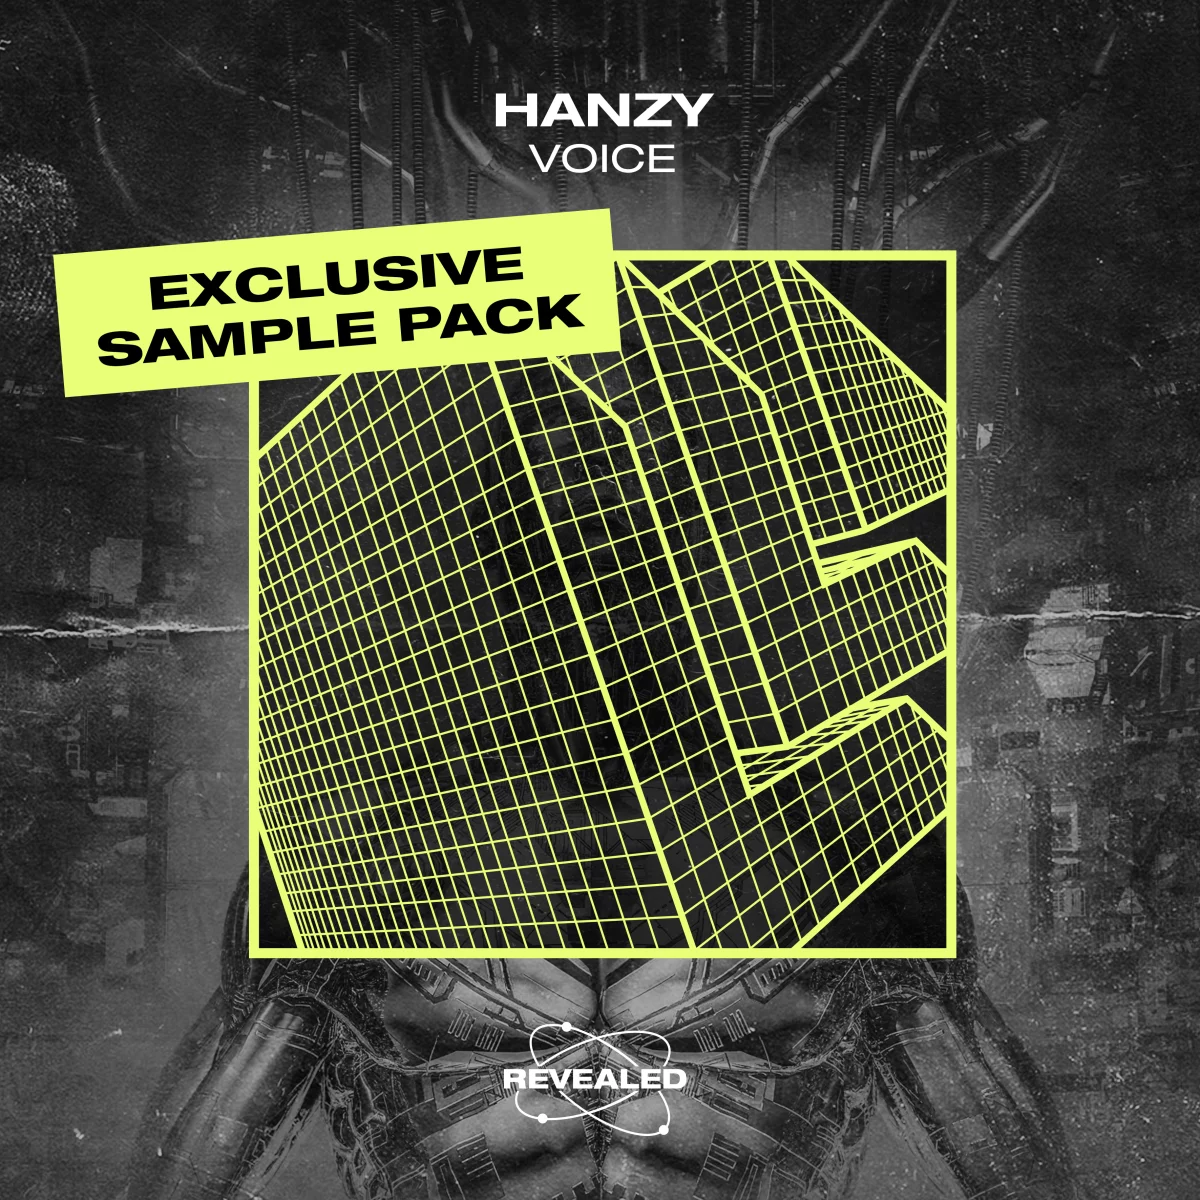 Voice [Exclusive Sample Pack] - Hanzy⁠